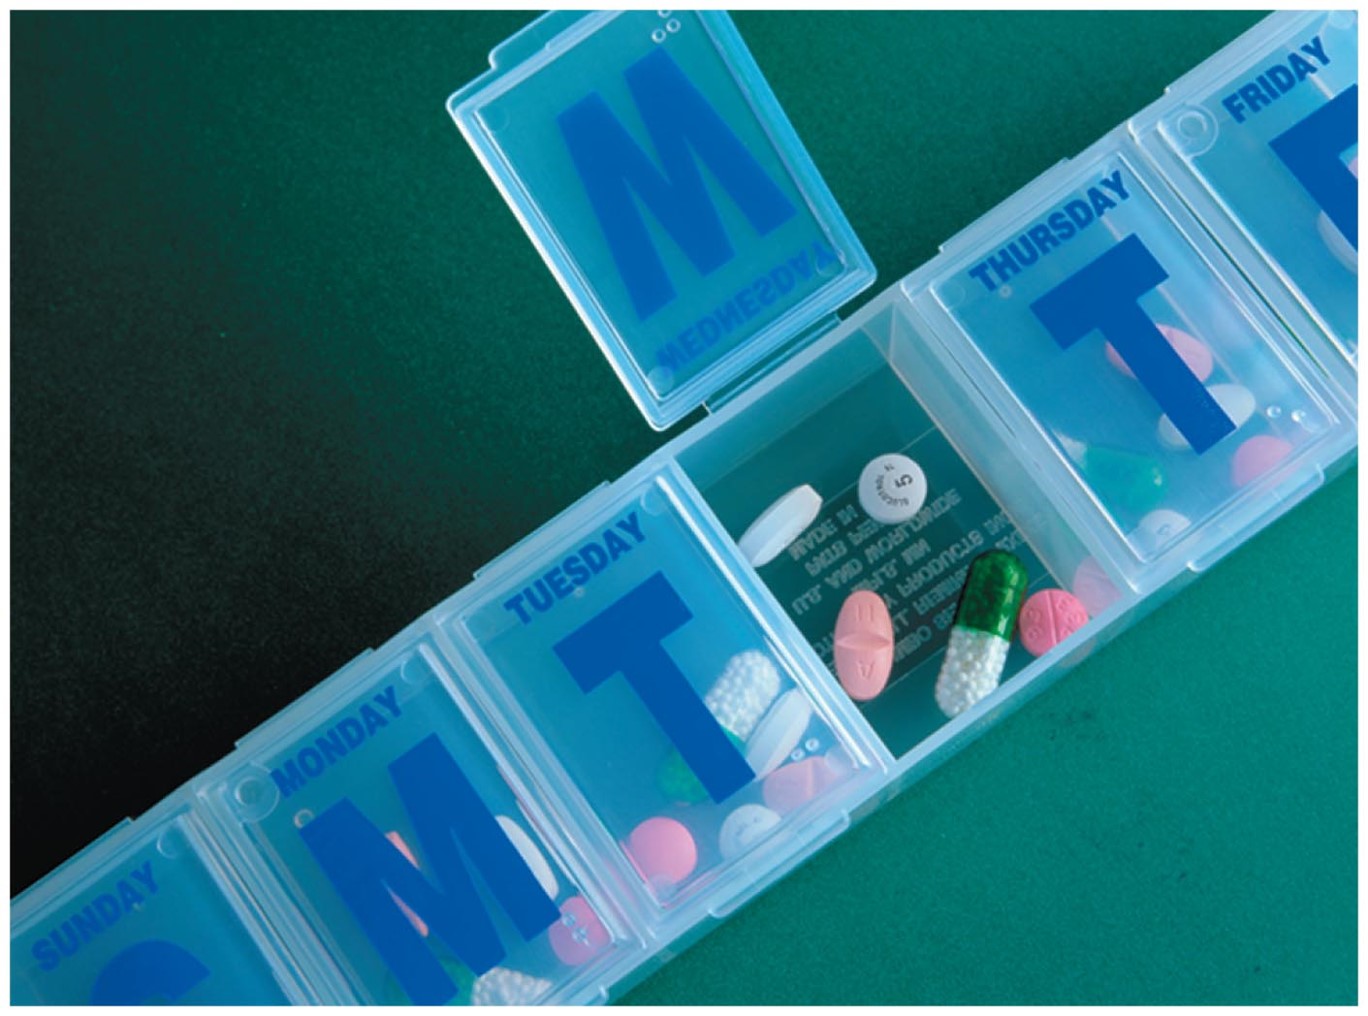 Daily pill containers like this one are often used by the elderly to remind them